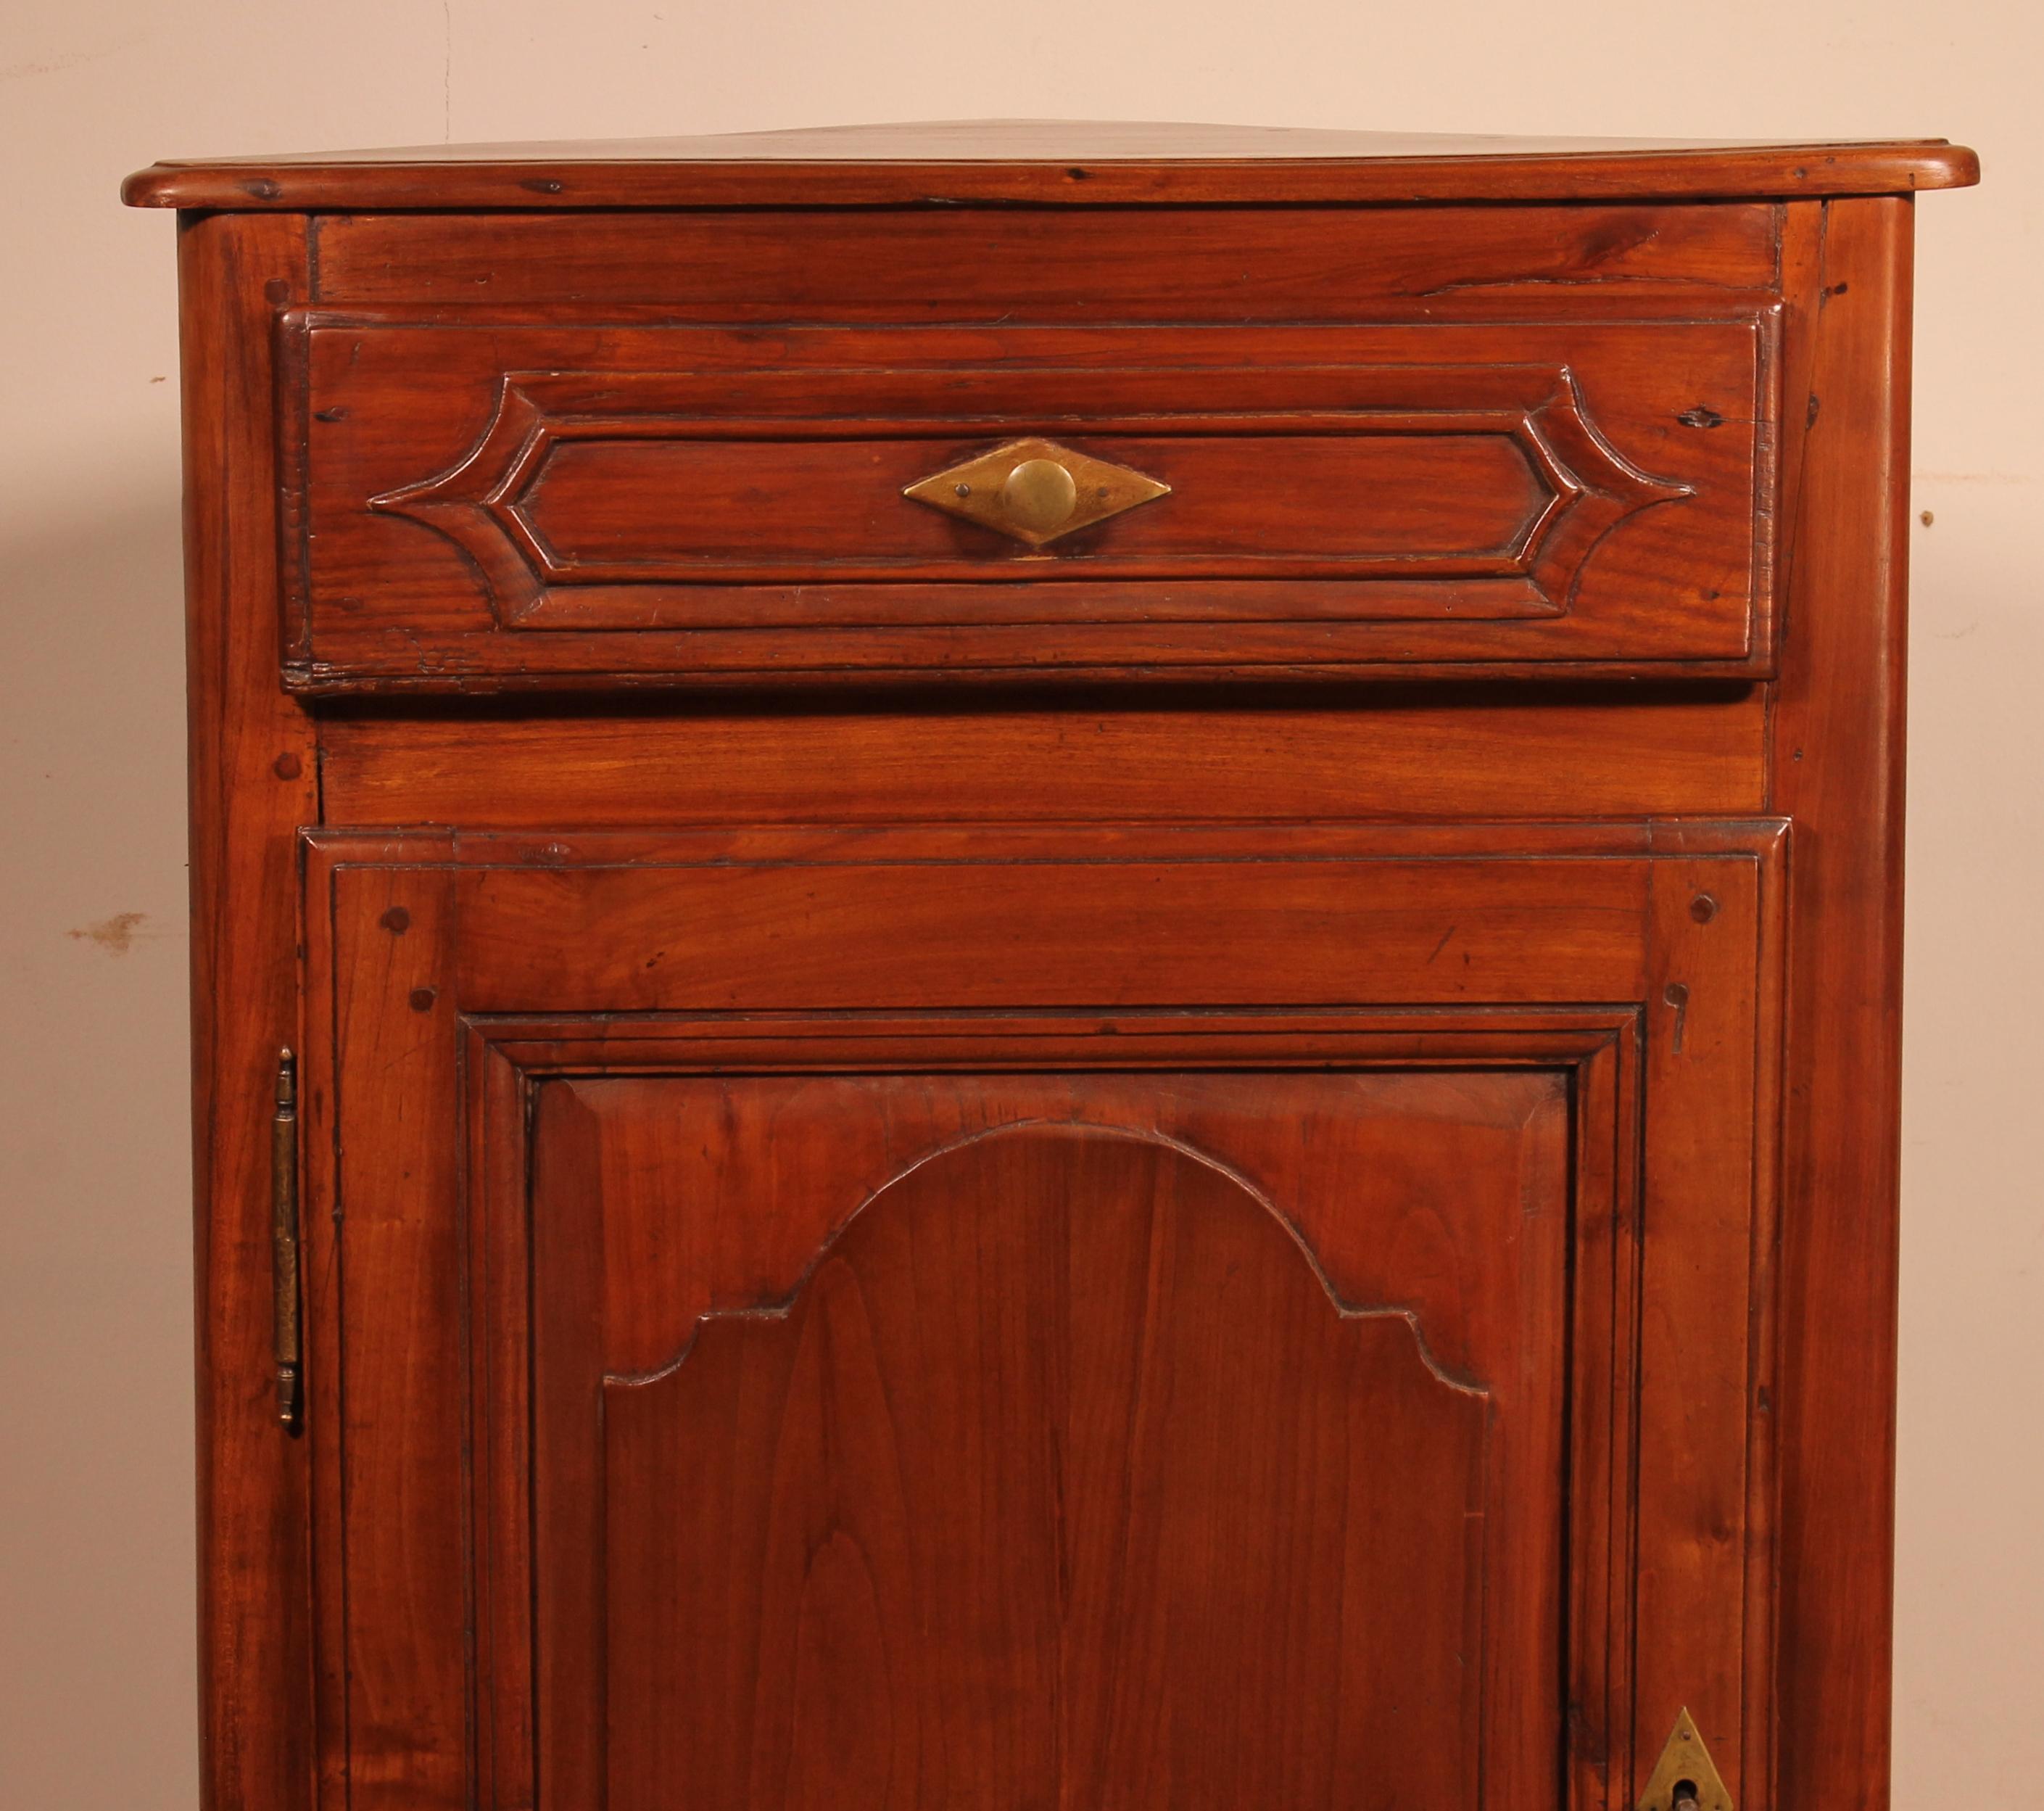 Lovely Louis XV corner cupboard in cherry wood from the beginning of the 19th century from France
Very nice corner cupboard which has interesting dimensions. Small and high.
The corner cabinet is in perfect condition and has a superb